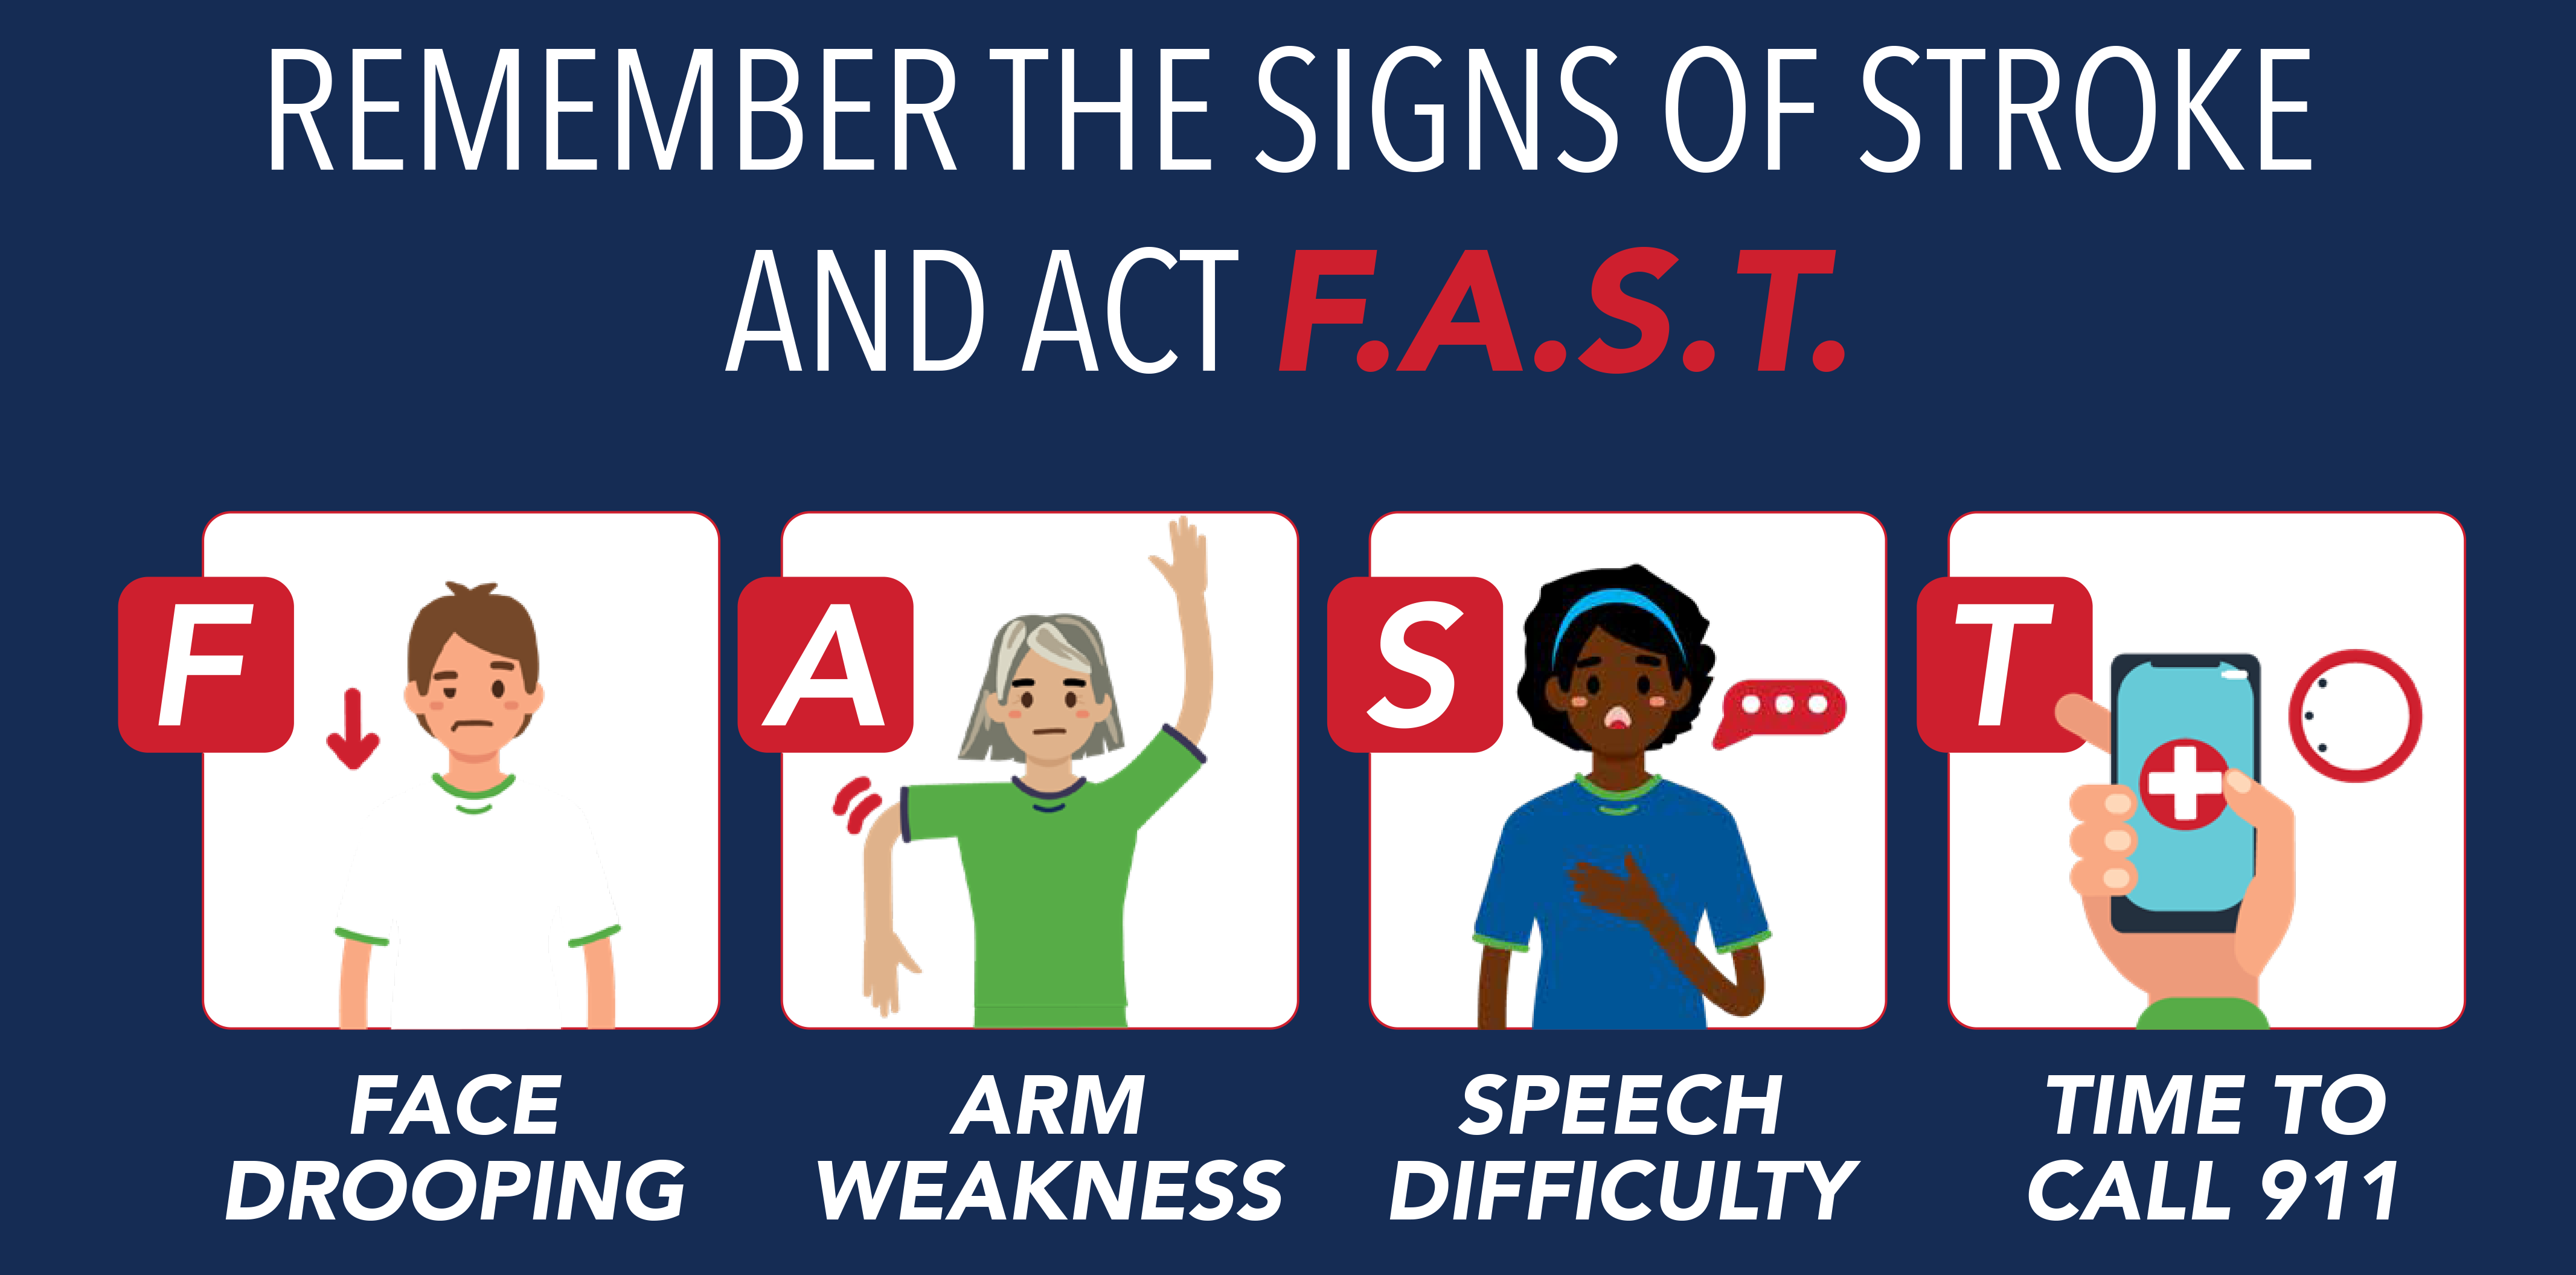 Know the signs of a stroke - face drooping, arm weakness, speech difficulty - time to call 911